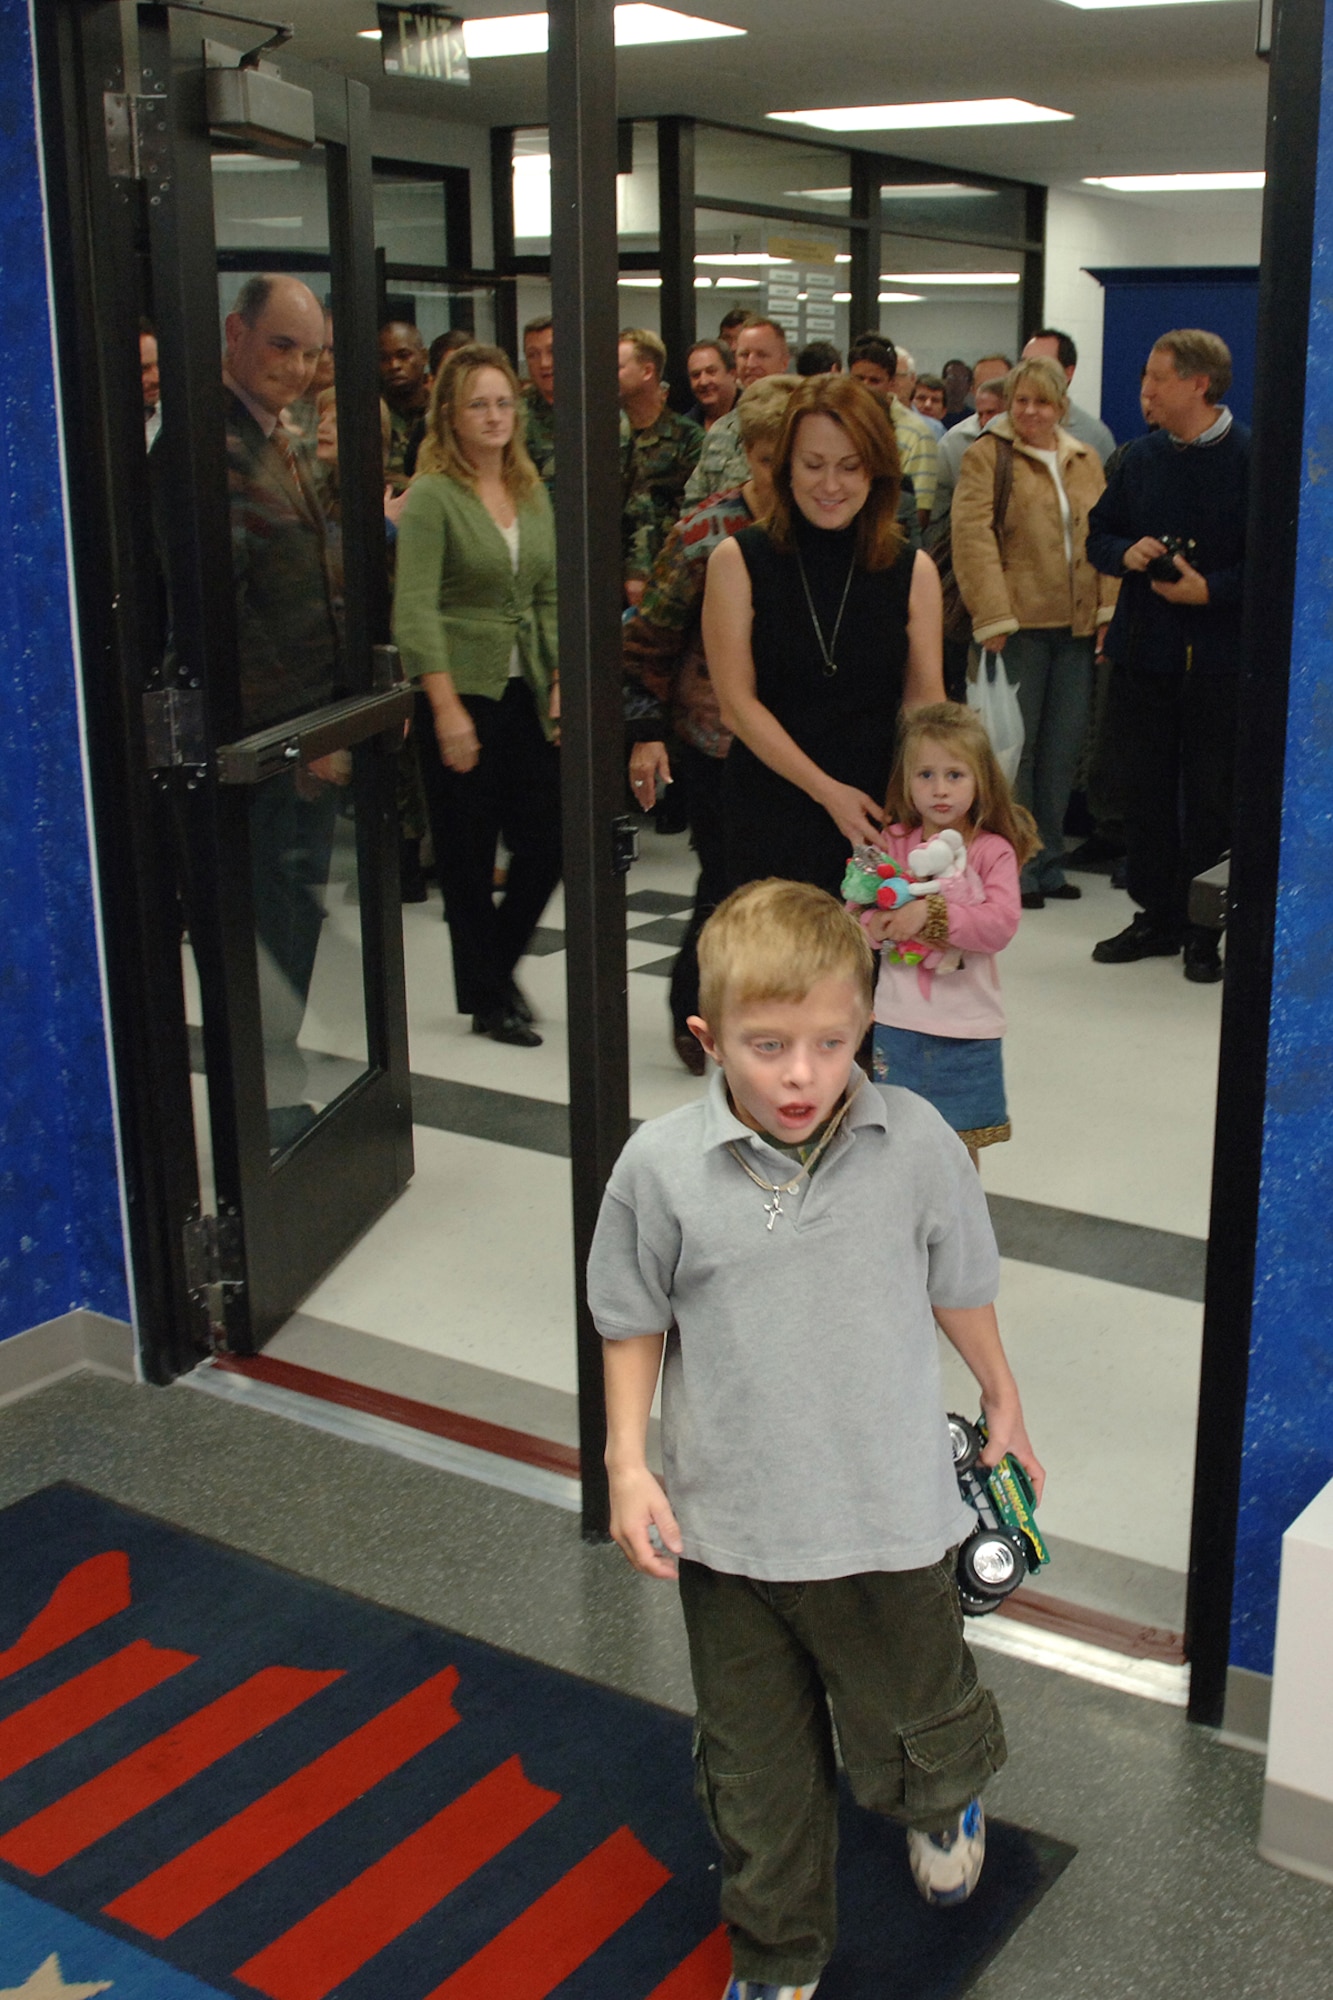 Ben Roessler is among the first to enter the newly dedicated Raymond E. Roessler Team Center in Bldg. 507. Following behind are his mother, Annette Roessler, and sister Abby, and other members of the Roessler family. The center, which includes a cafeteria and meeting area, is named for Lt. Col. Raymond Roessler, former 309th Commodities Maintenance Group deputy director, who died in October in an aircraft accident. 